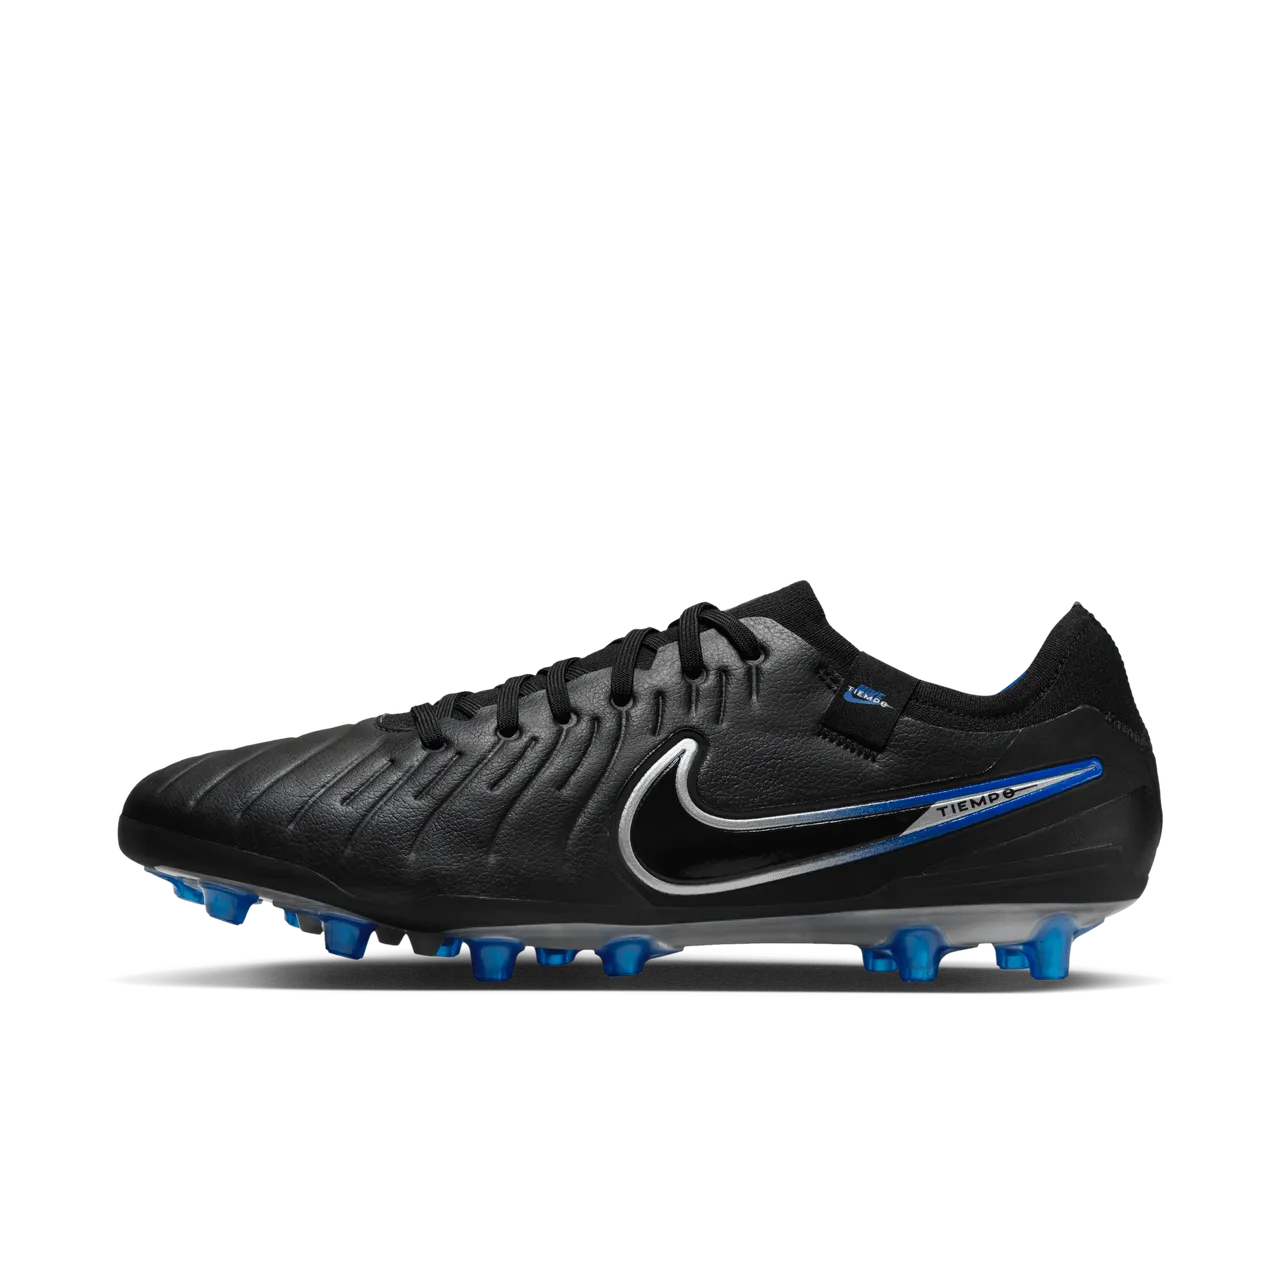 Nike Tiempo Legend 10 Pro Artificial-Grass Low-Top Football Boot - Black - Leather